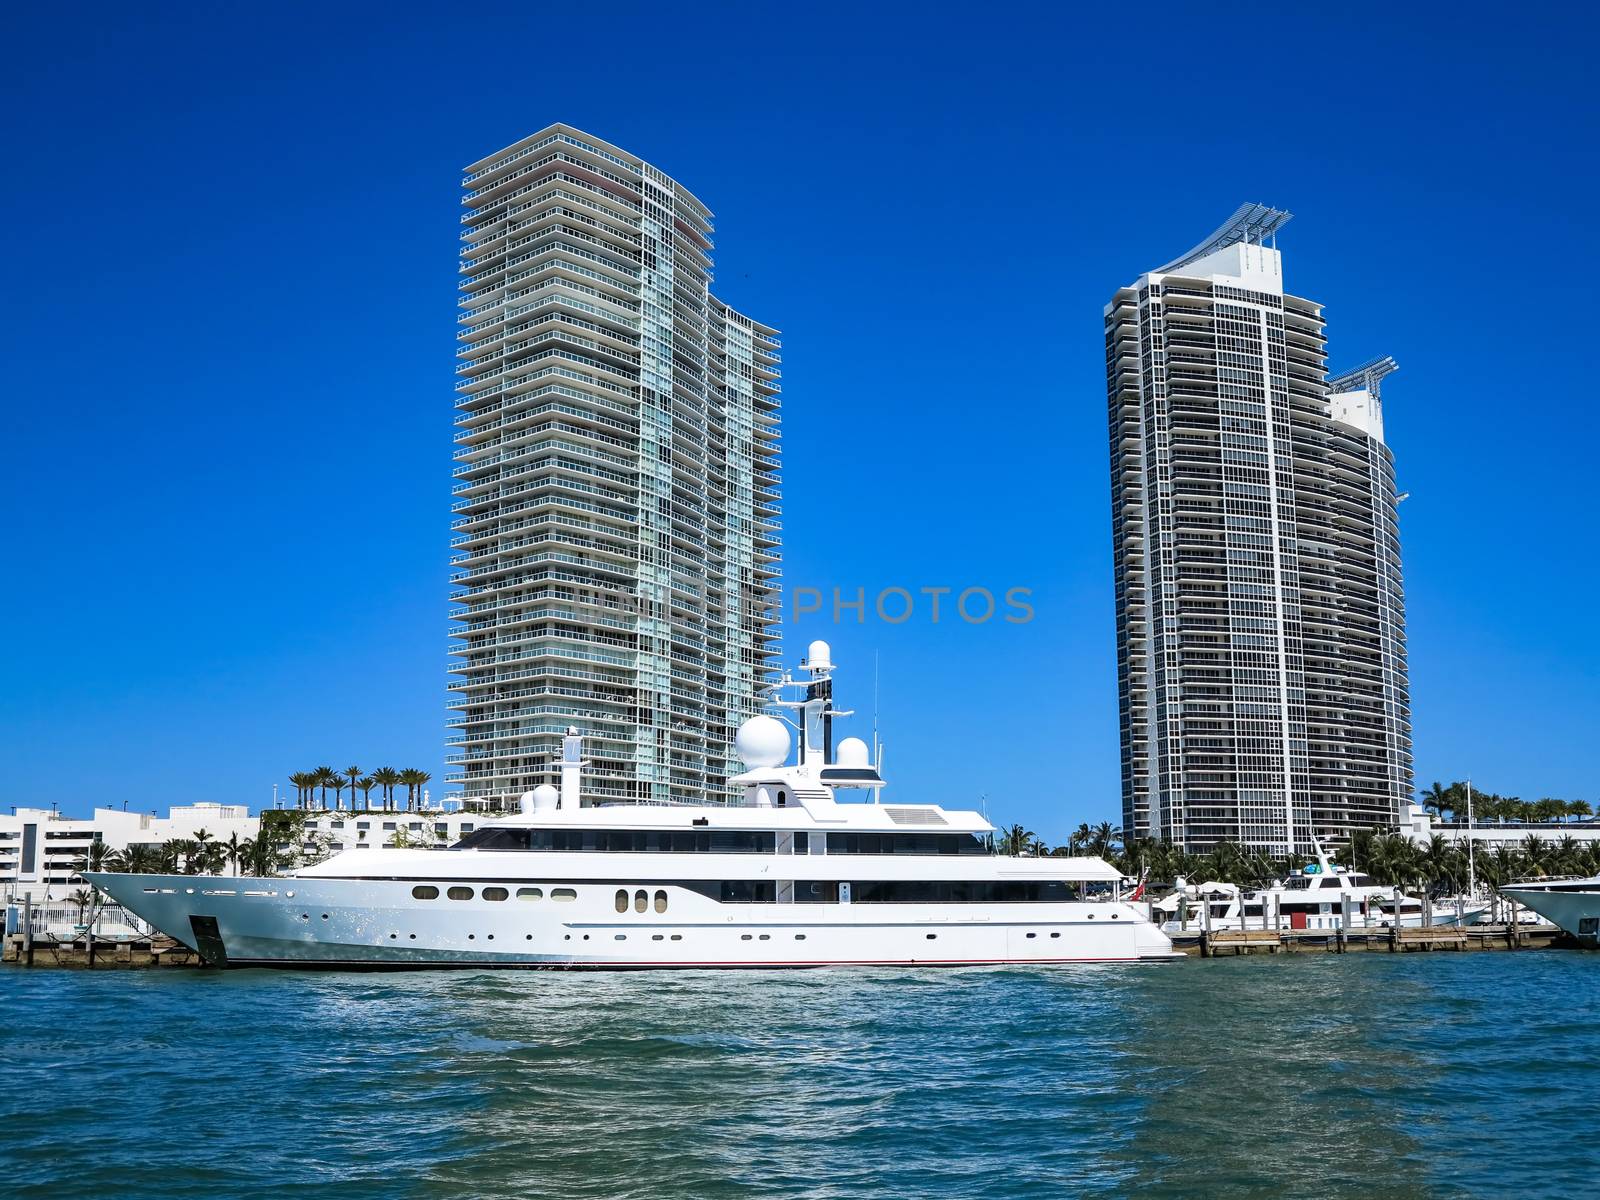 A large yacht and 2 modern buildings